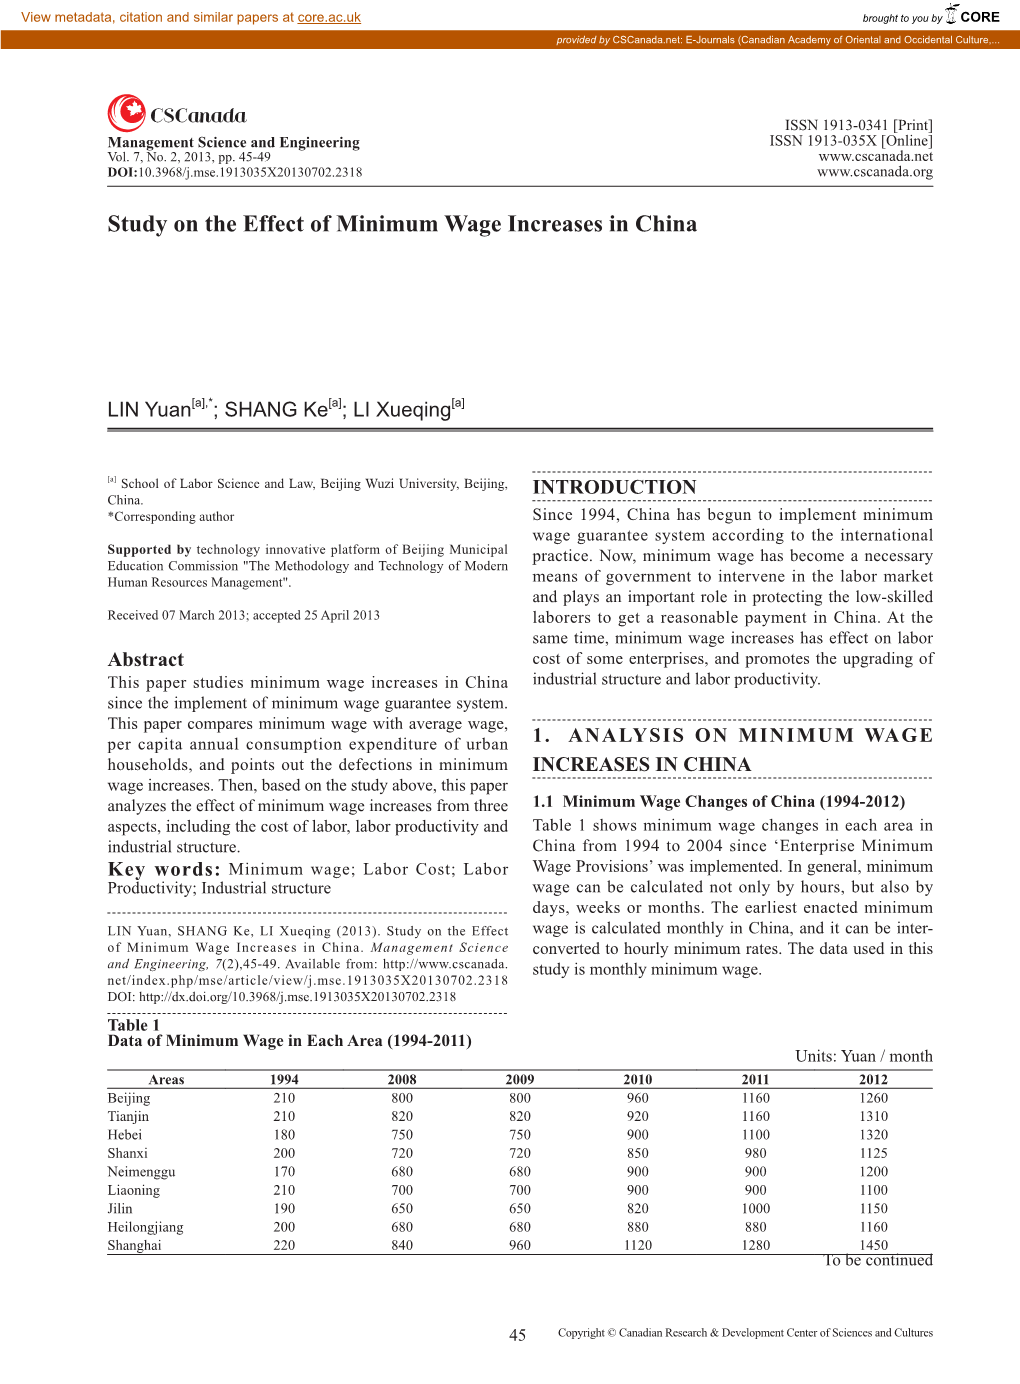 Study on the Effect of Minimum Wage Increases in China